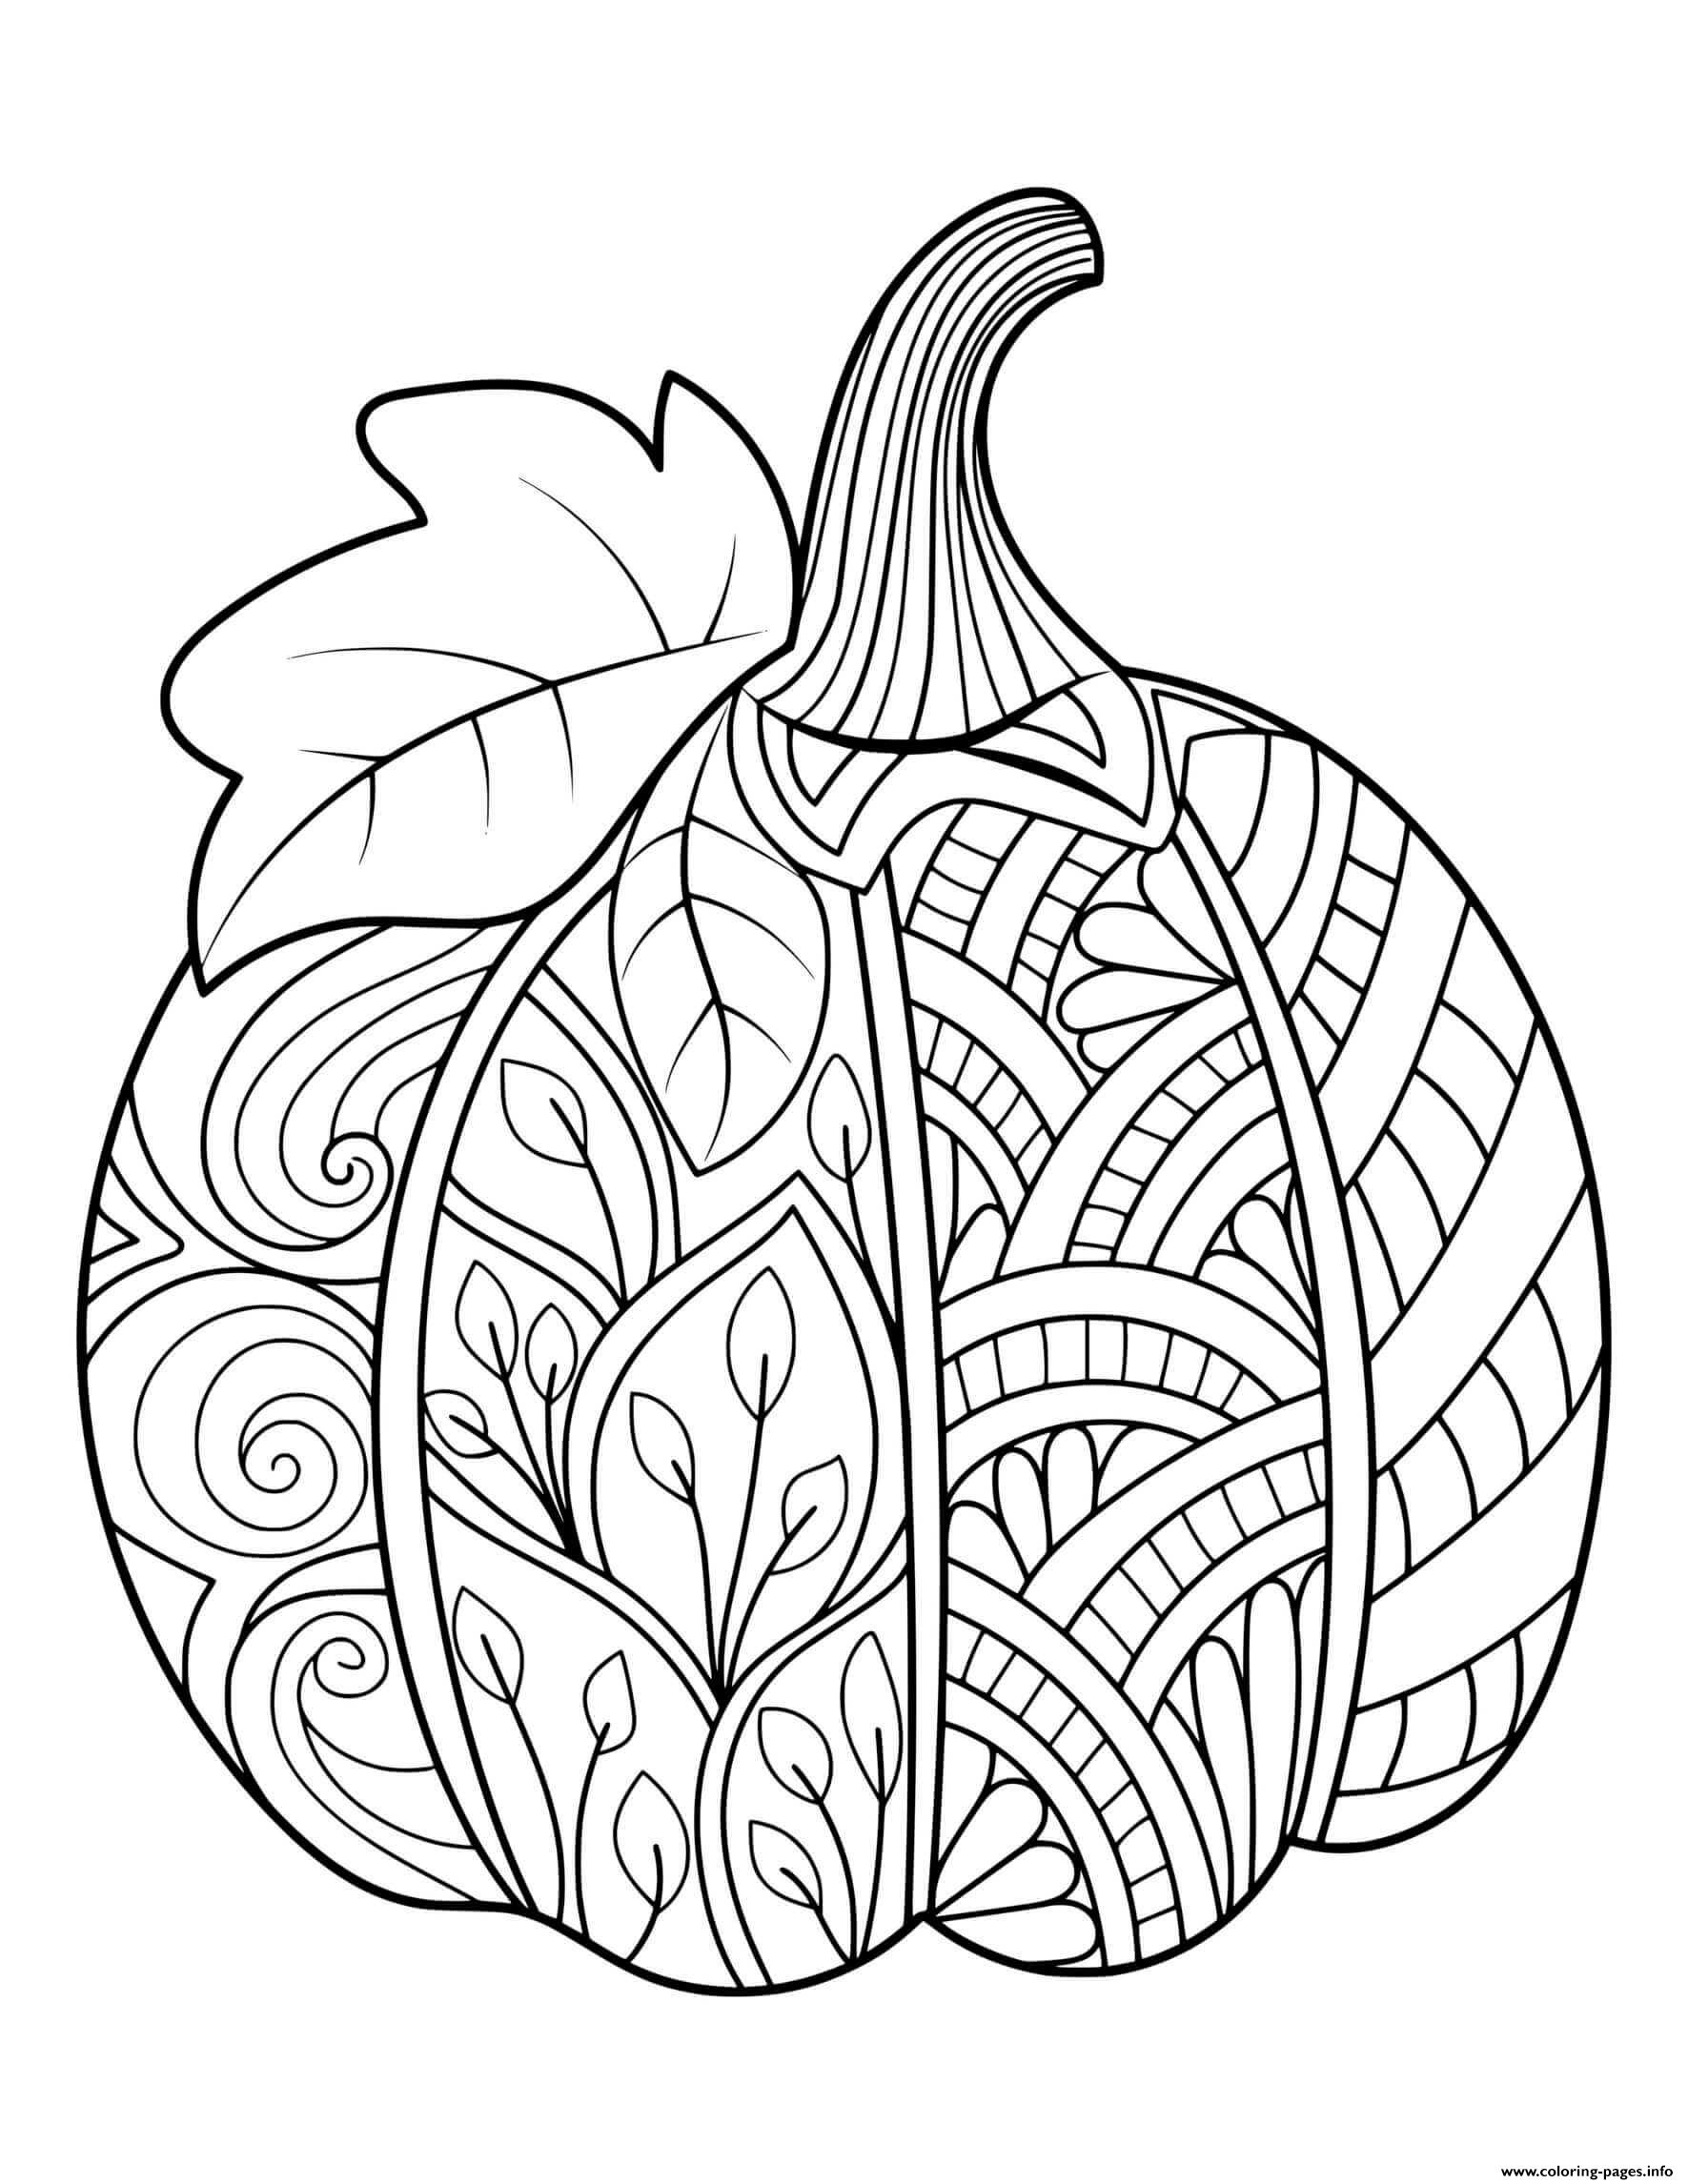 50 best ideas for coloring | Coloring Sheet Images